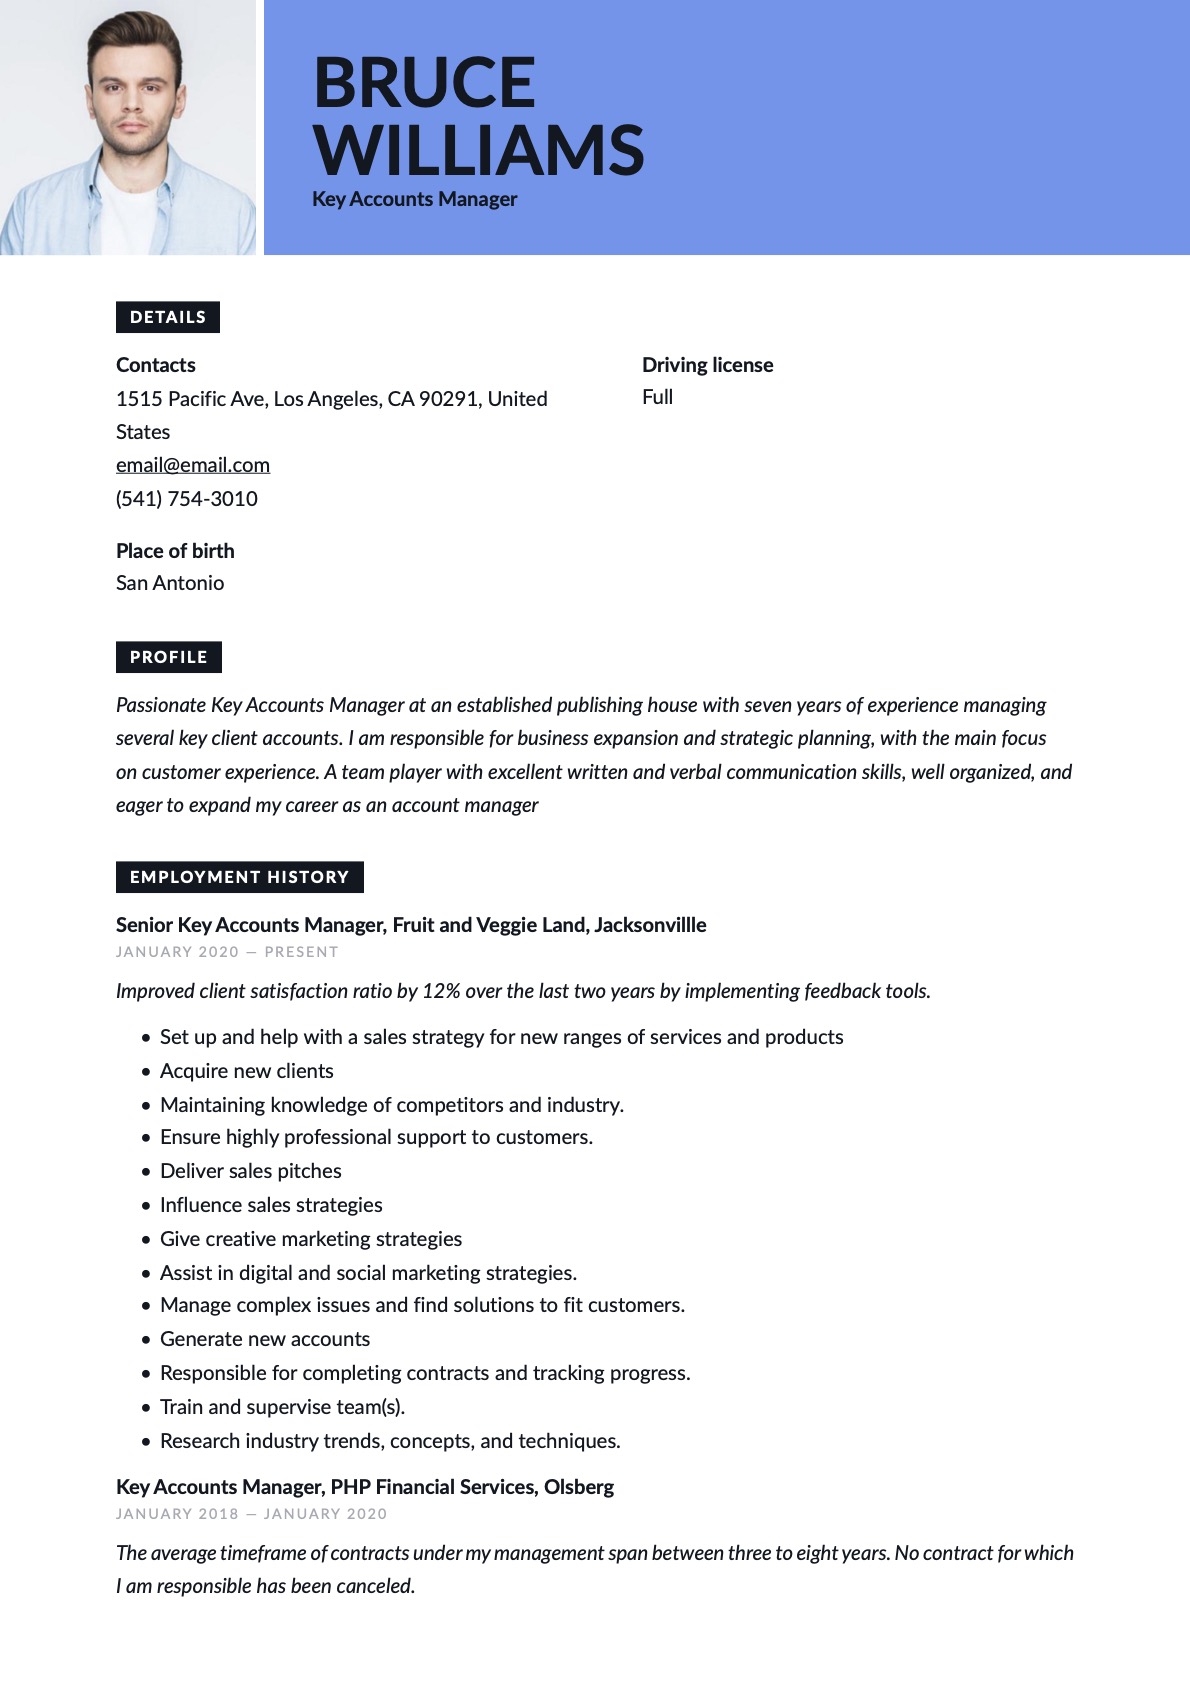 Example resume key accounts manager-9